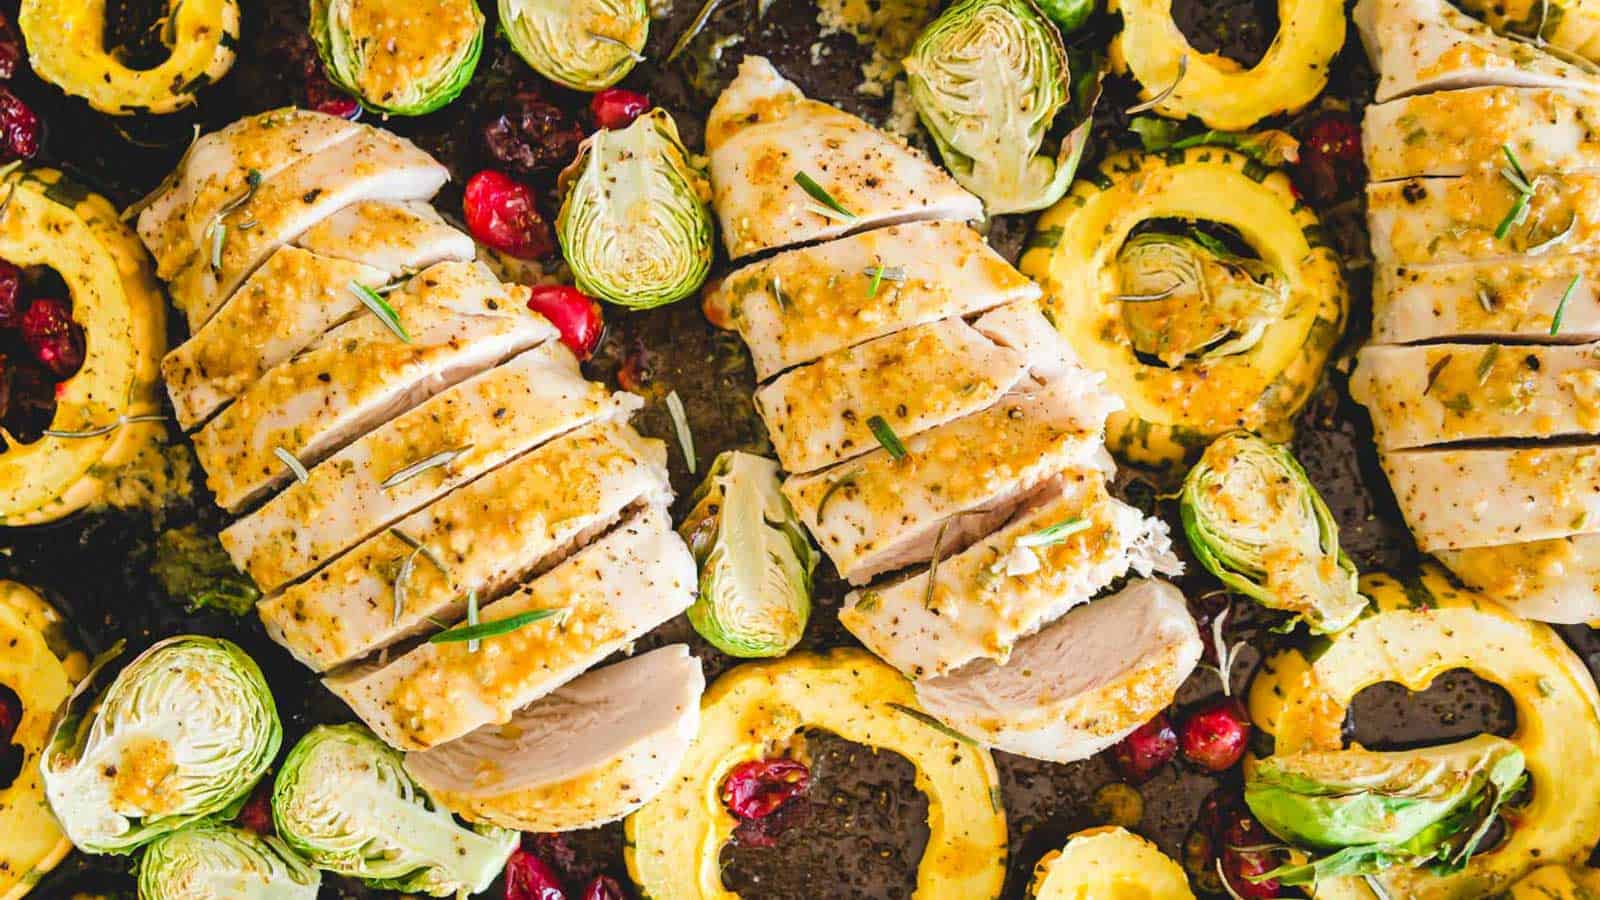 Maple mustard chicken breasts with brussels sprouts, squash and cranberries.